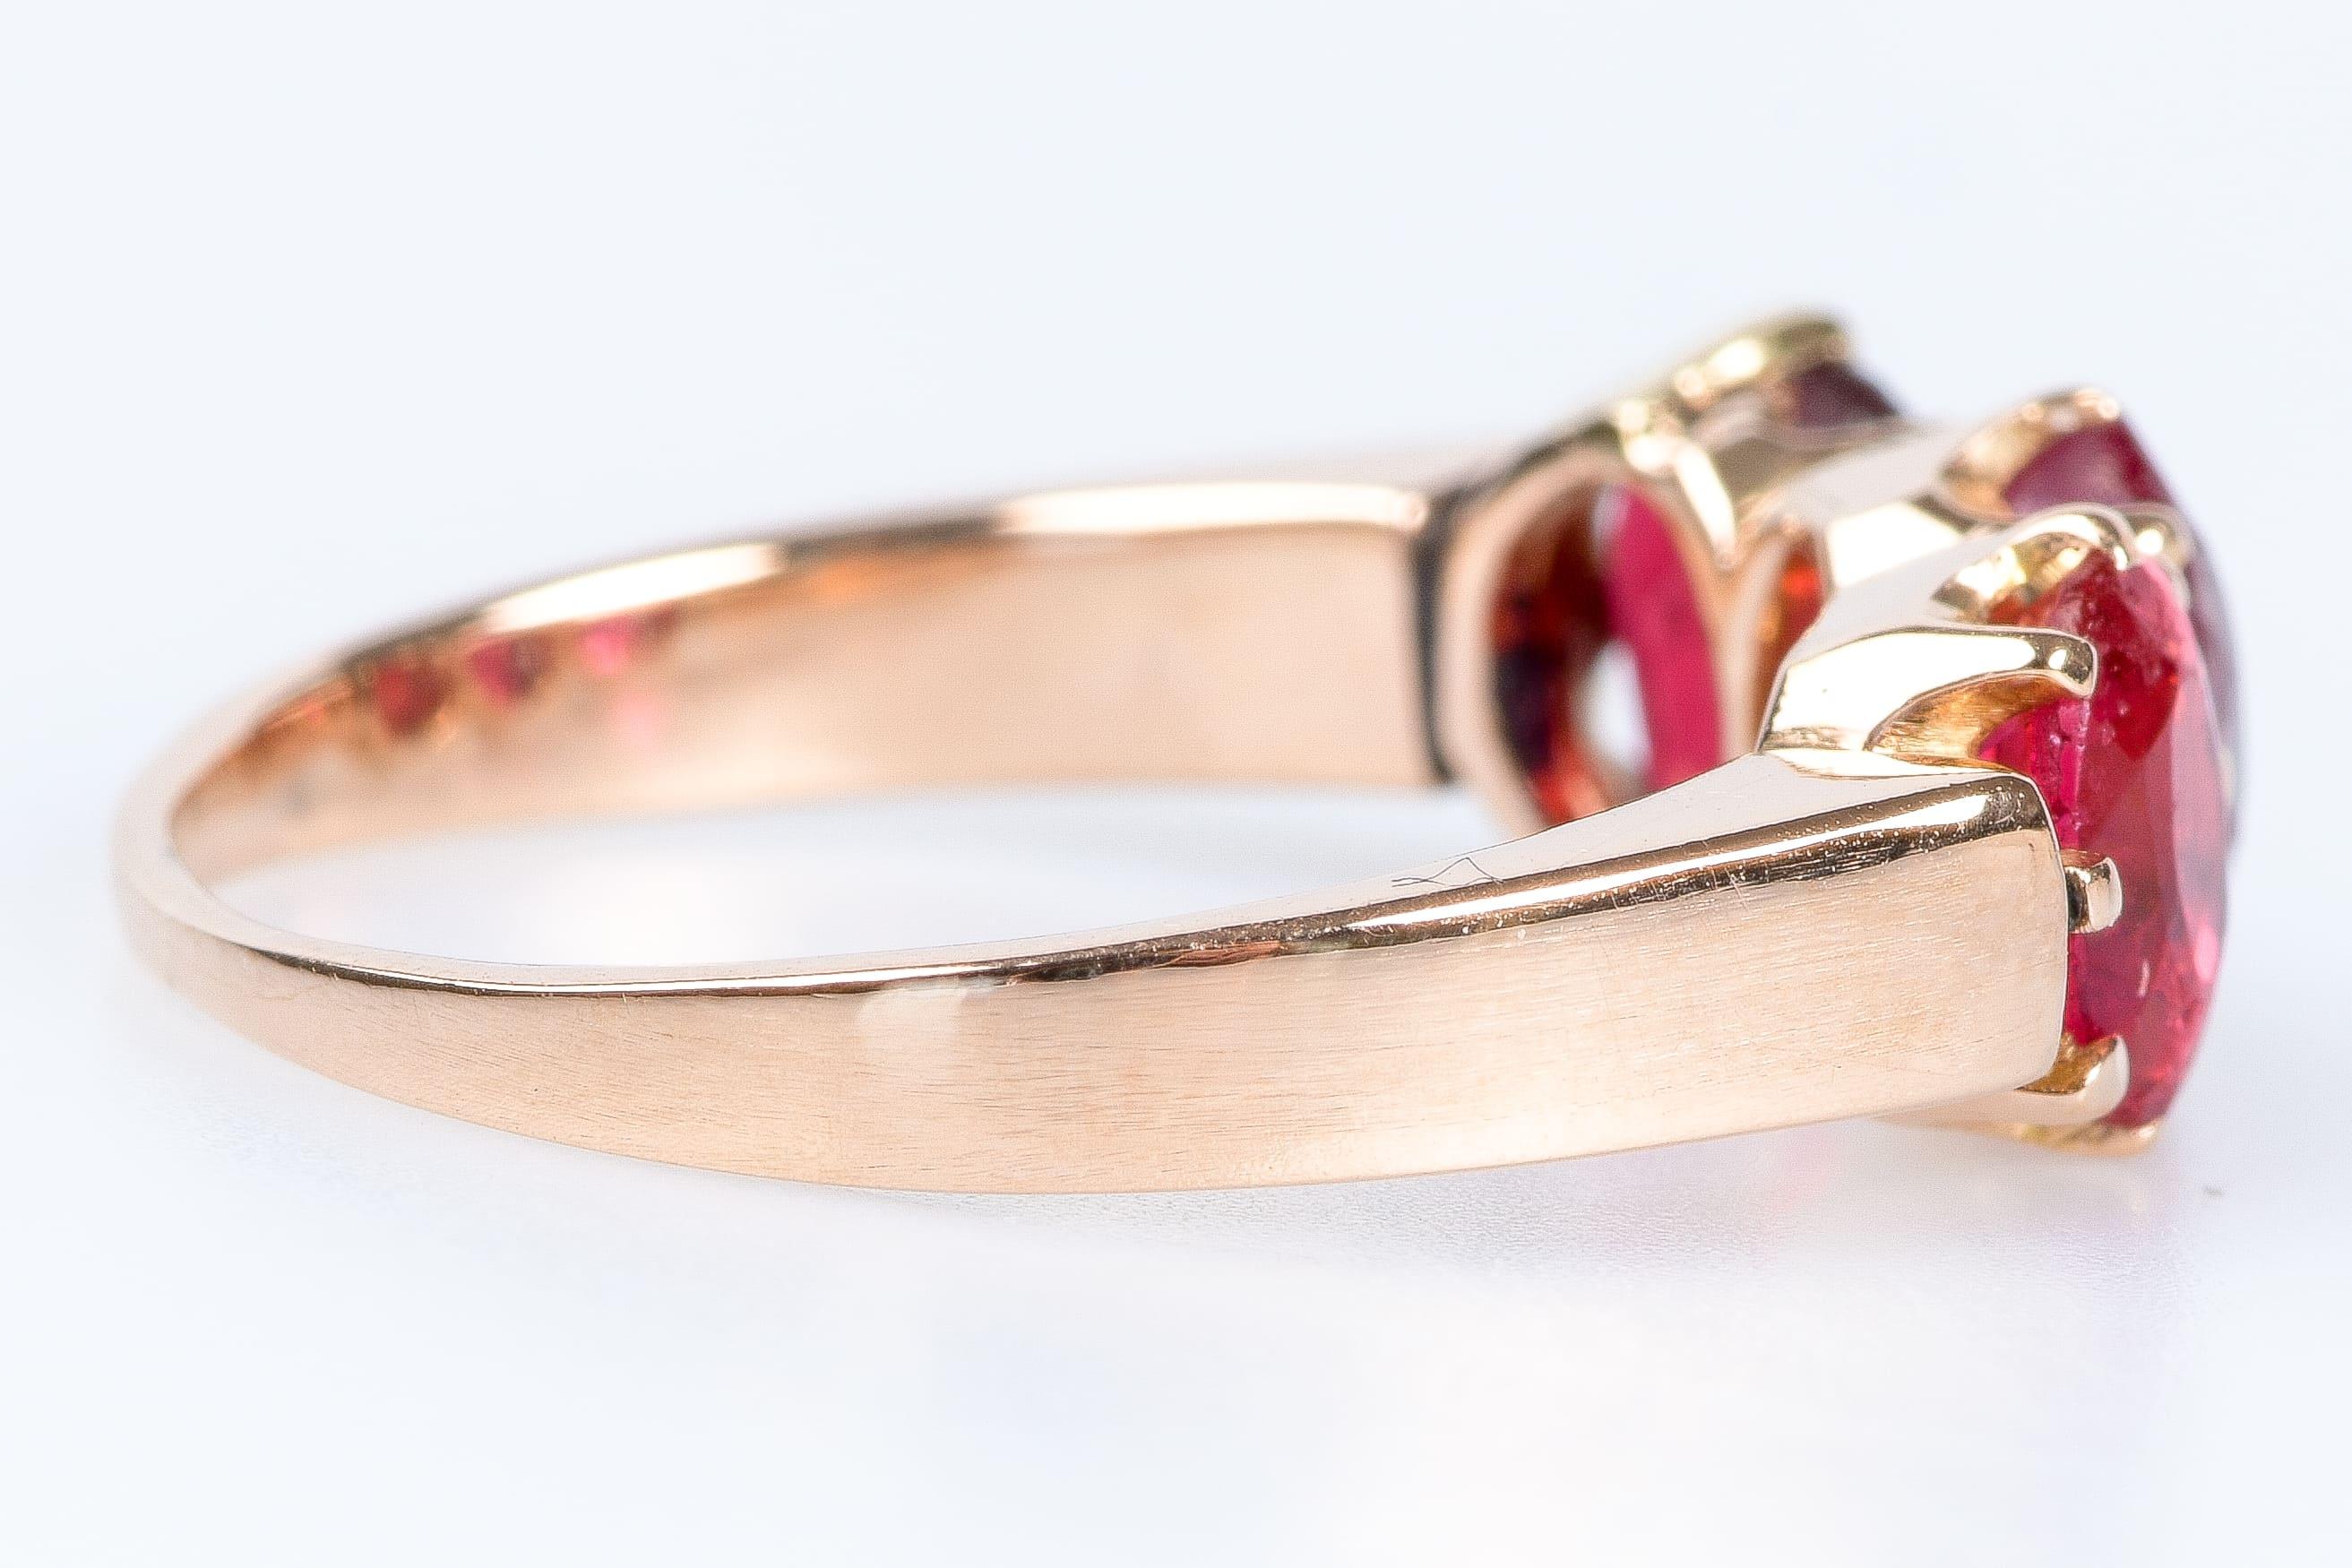 18-carats pink gold ring with 3 oval rubies of 0.22 carats each or 0.66 carats total.

Size EU: 52 / US: 6

Weight: 3.7 grams

Dimensions: 
1.6 x 0.5 cm
Ring: 0.1 cm

Gold 